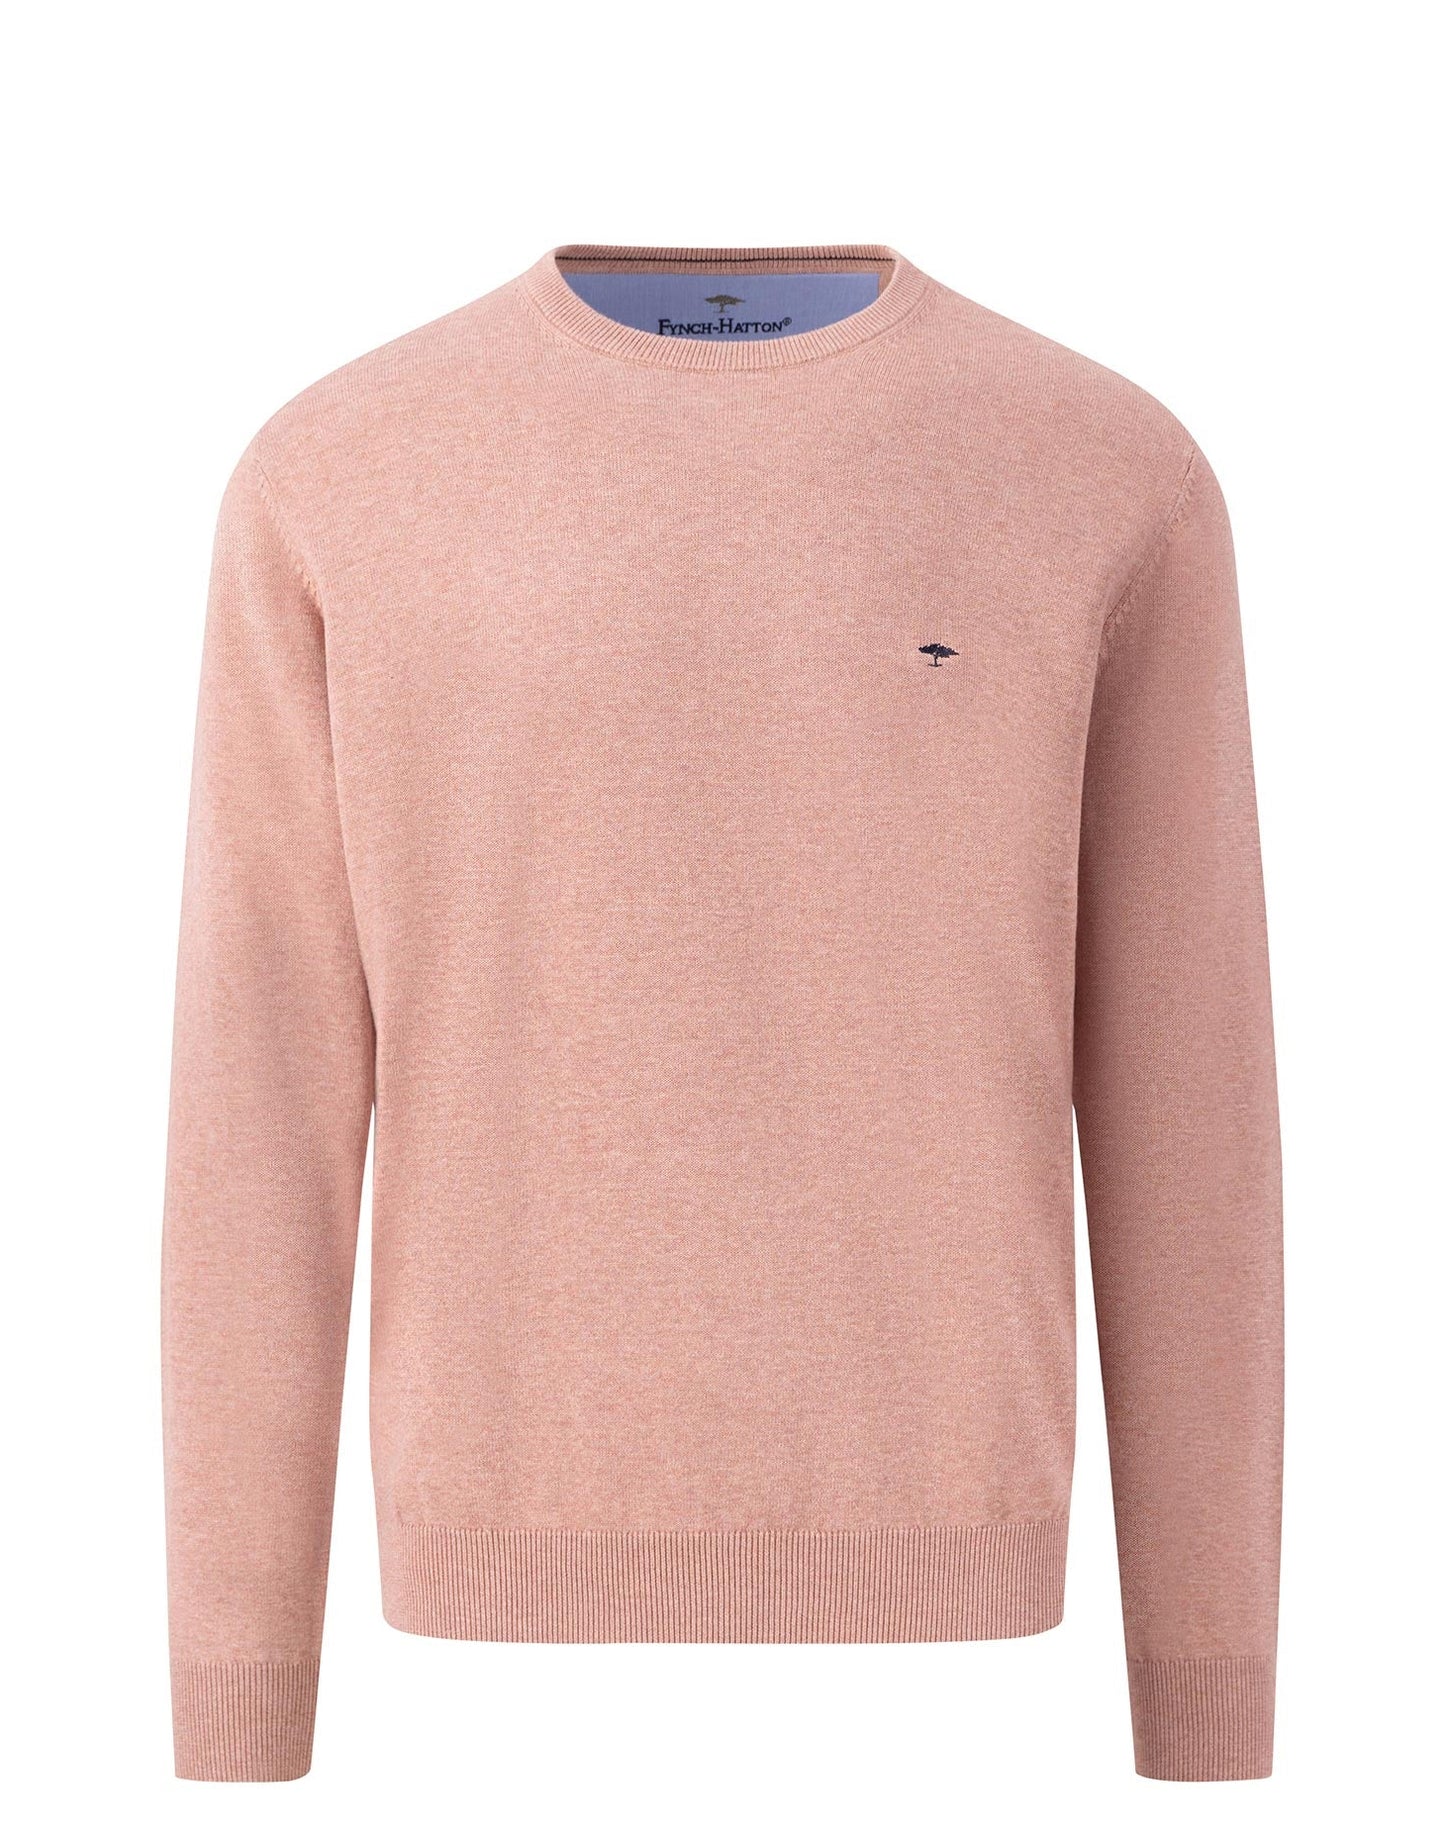 FINE-KNIT SWEATER WITH A CREW NECK - Pale Berry